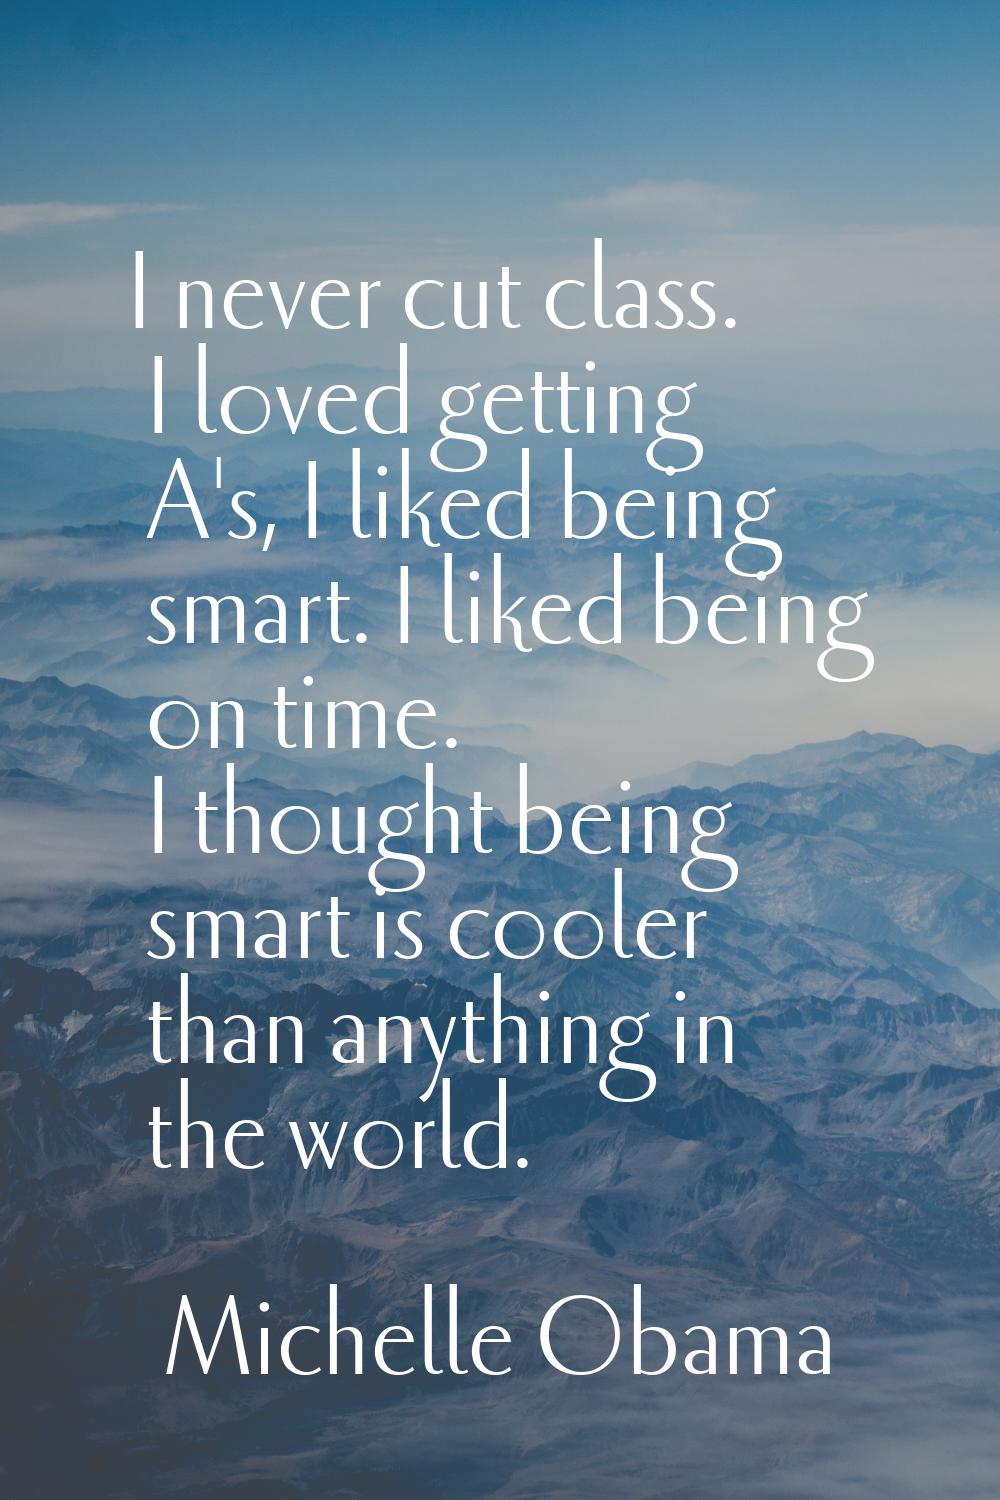 I never cut class. I loved getting A's, I liked being smart. I liked being on time. I thought being